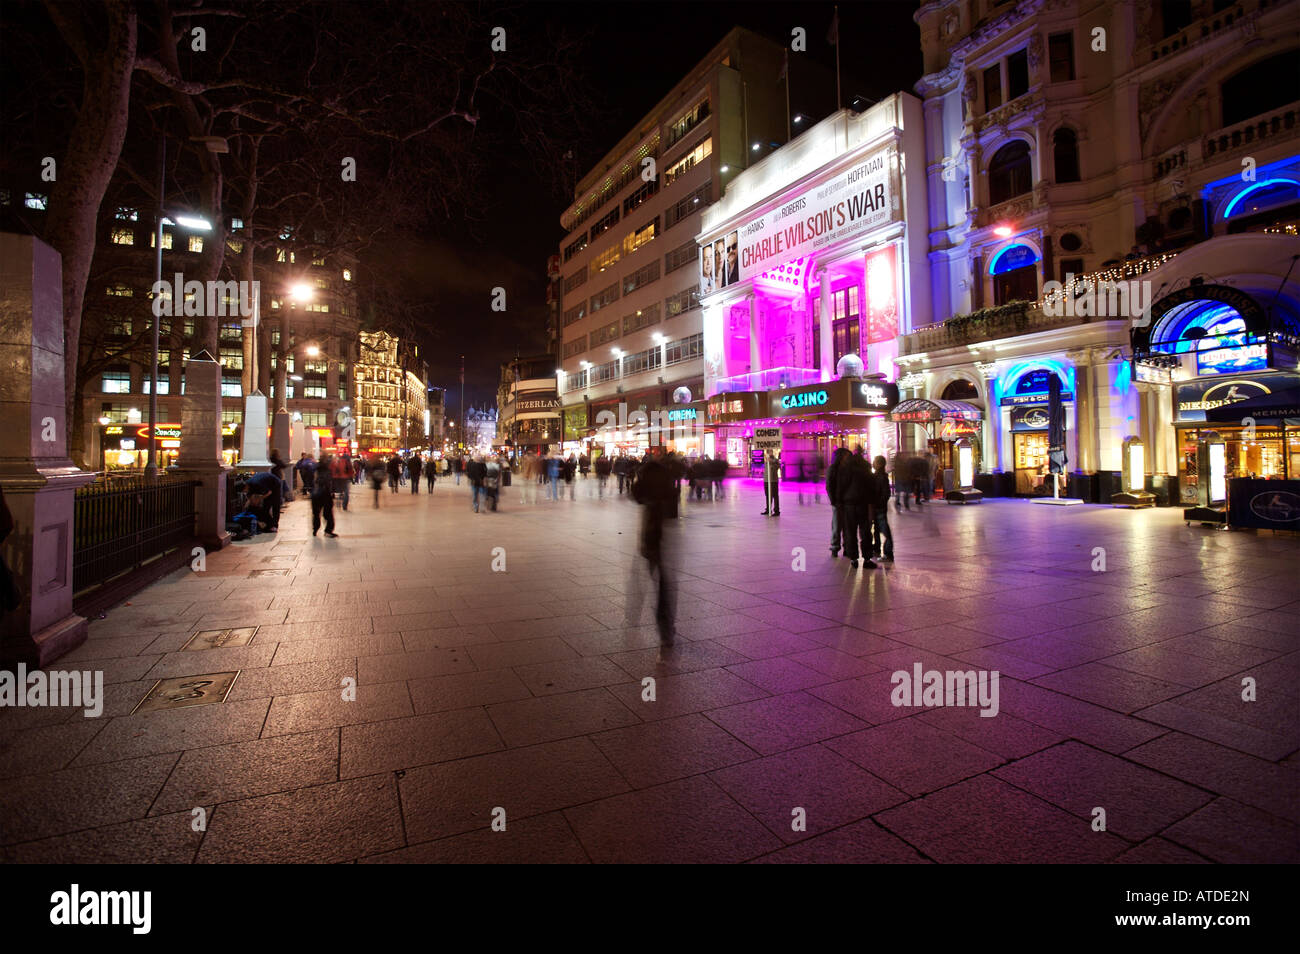 Leicester Square London At Night ATDE2N 